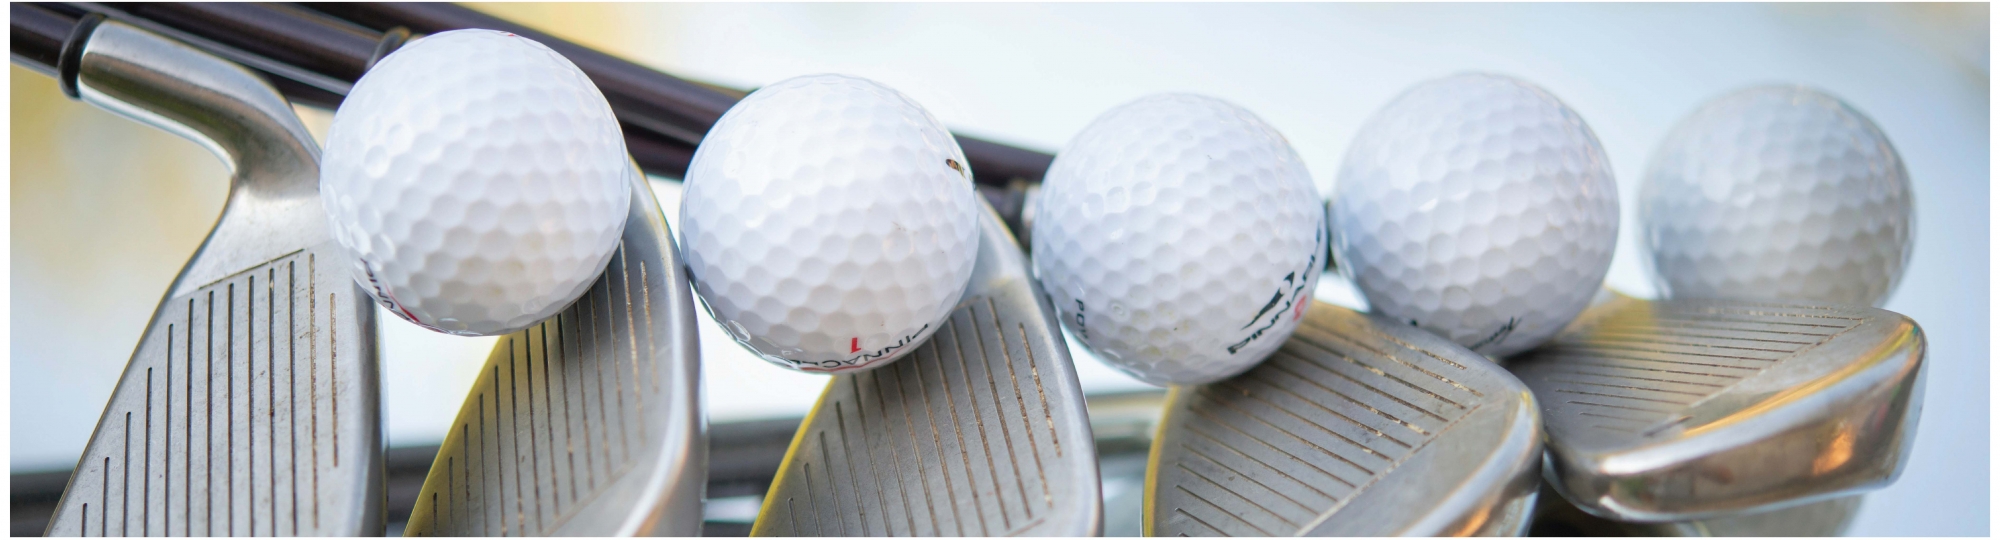 Image of golf clubs and balls